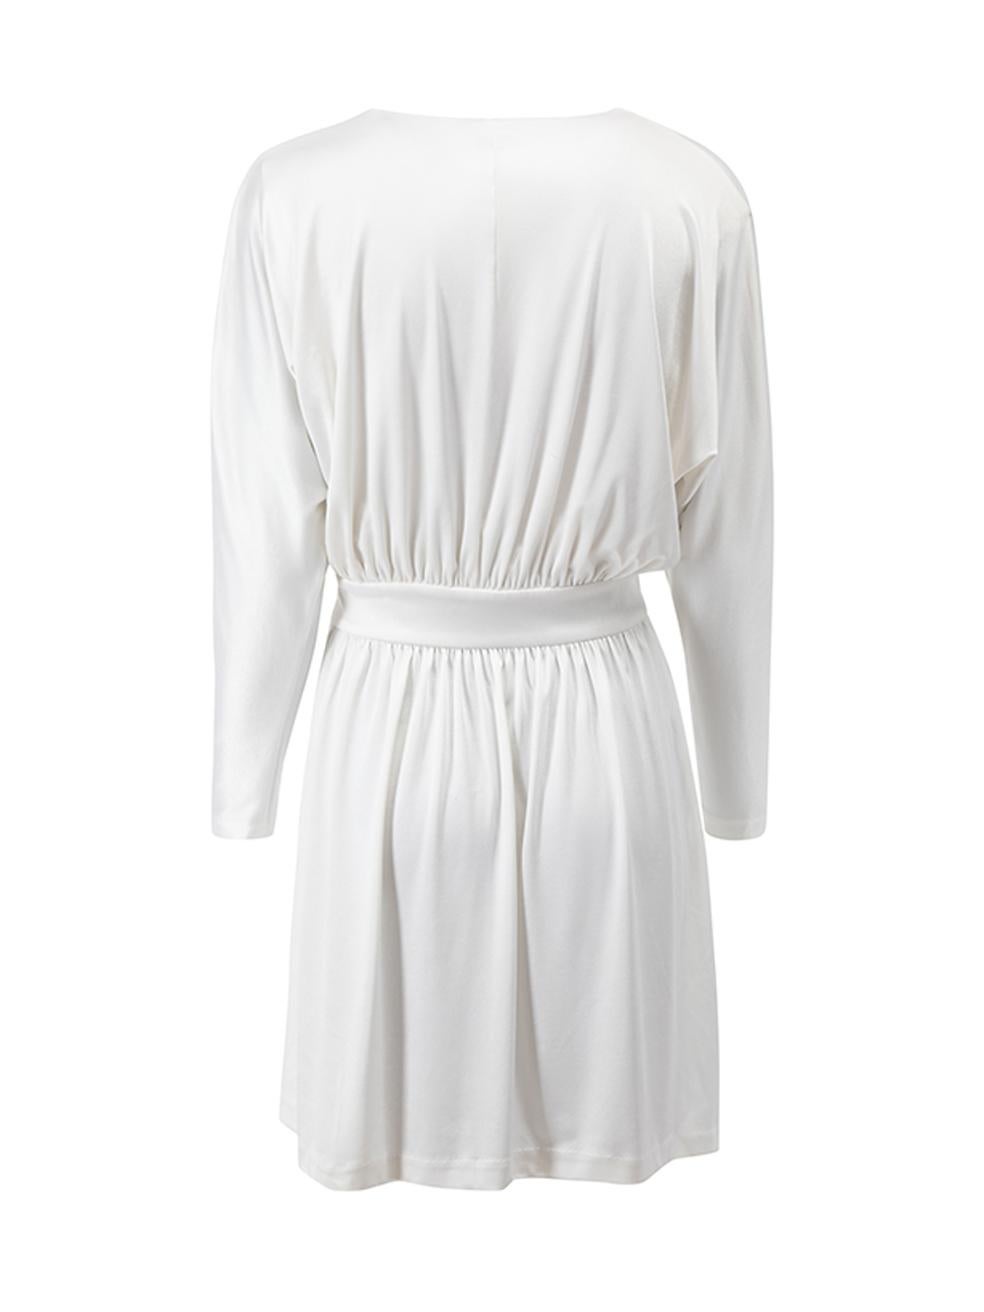 Halston Heritage Women's Ivory Bat Sleeves Mini Dress In Excellent Condition In London, GB